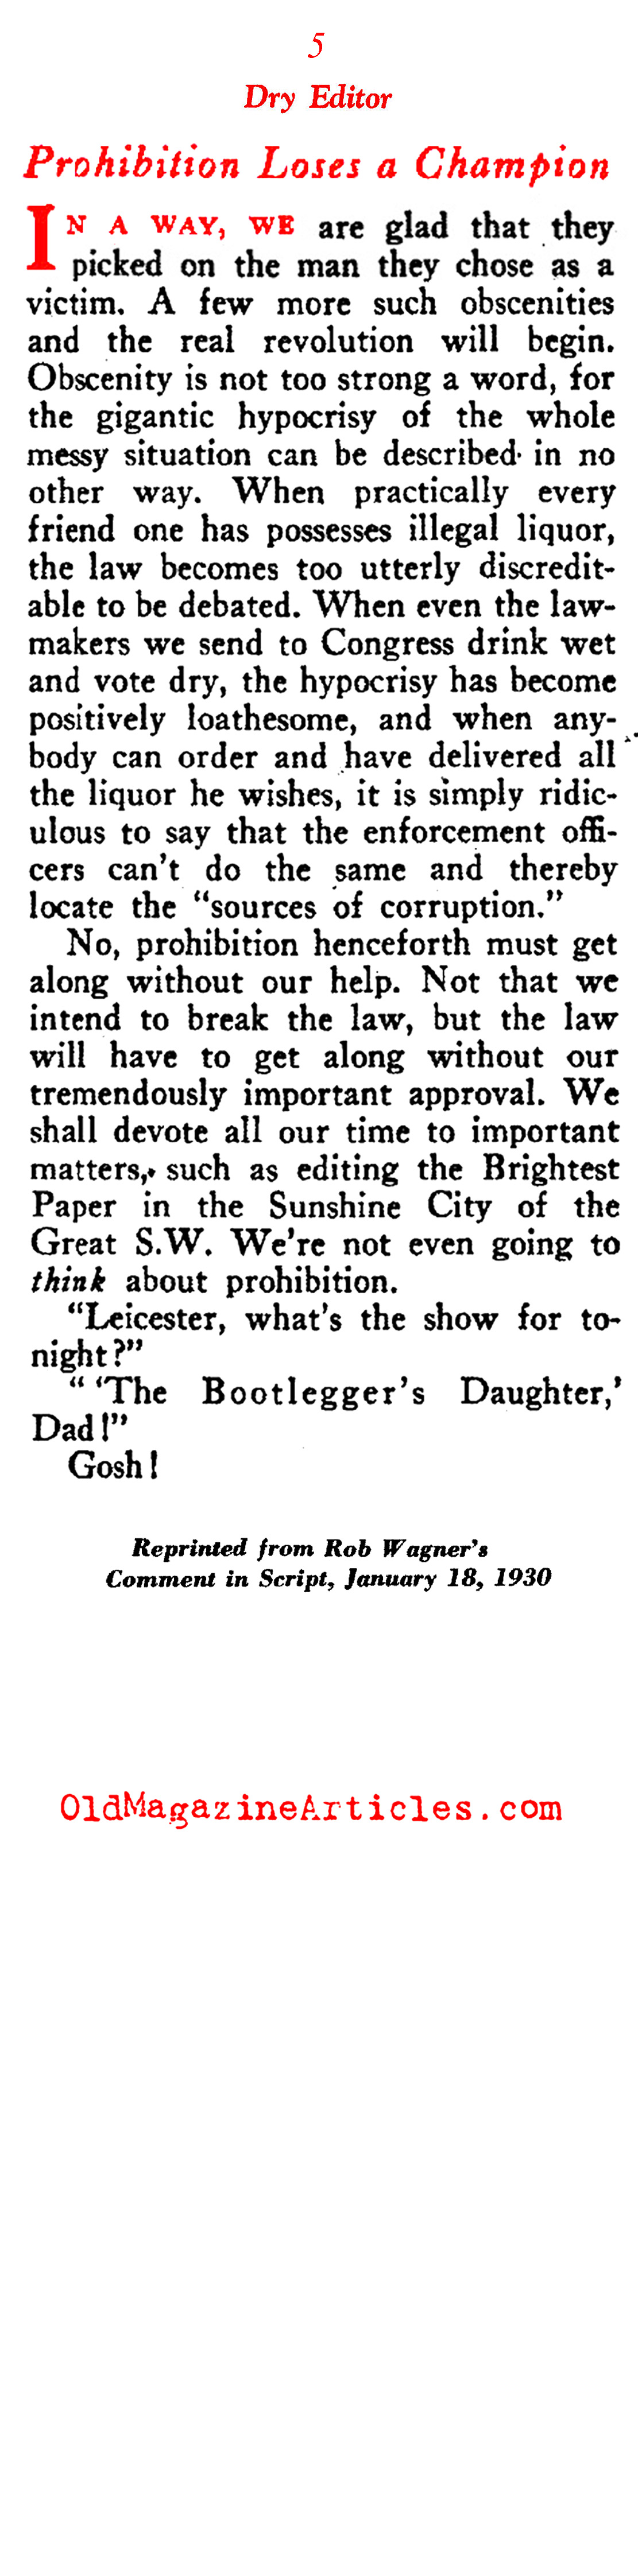 Prohibition Remembered (Rob Wagner's Script Magazine, 1945)